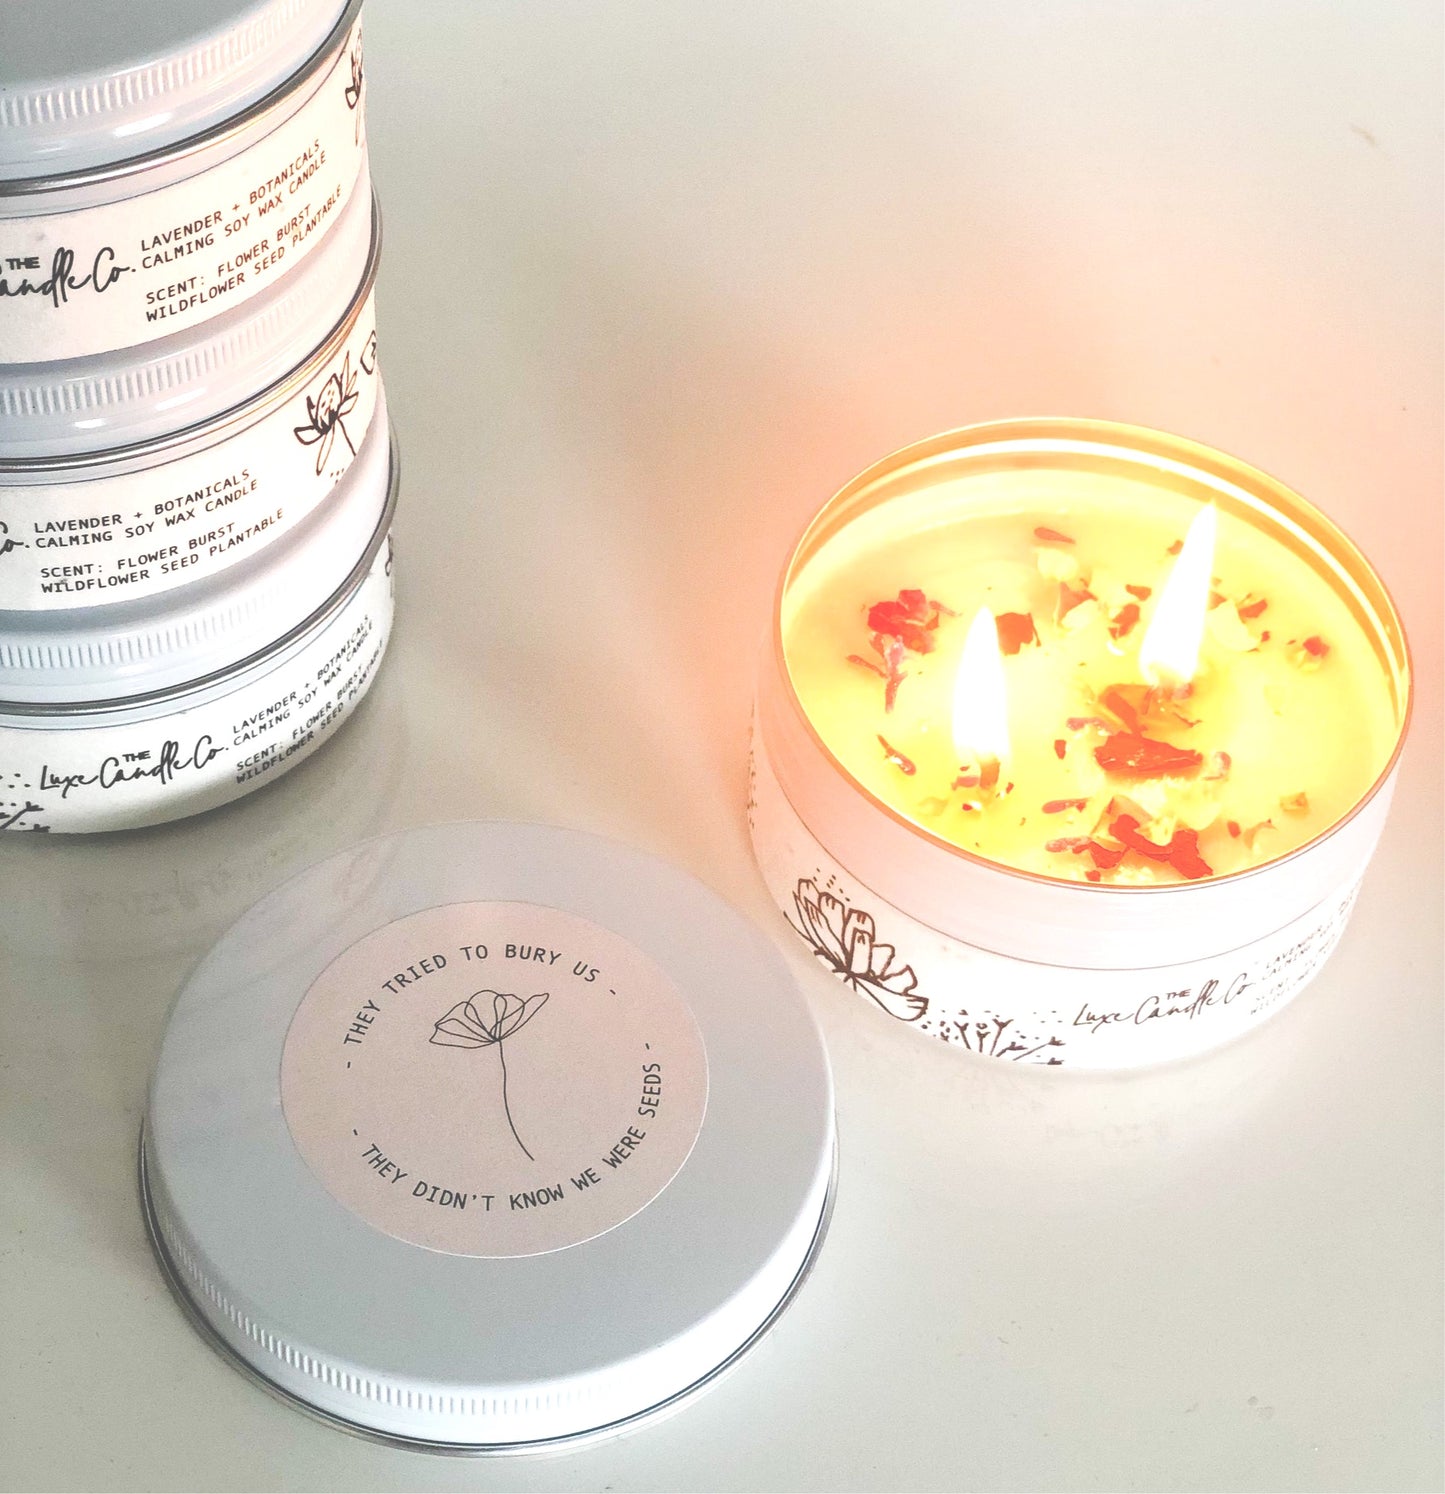 THEY DIDN’T KNOW WE WERE SEEDS . Scented flower burst soy candle with plantable wildflower label